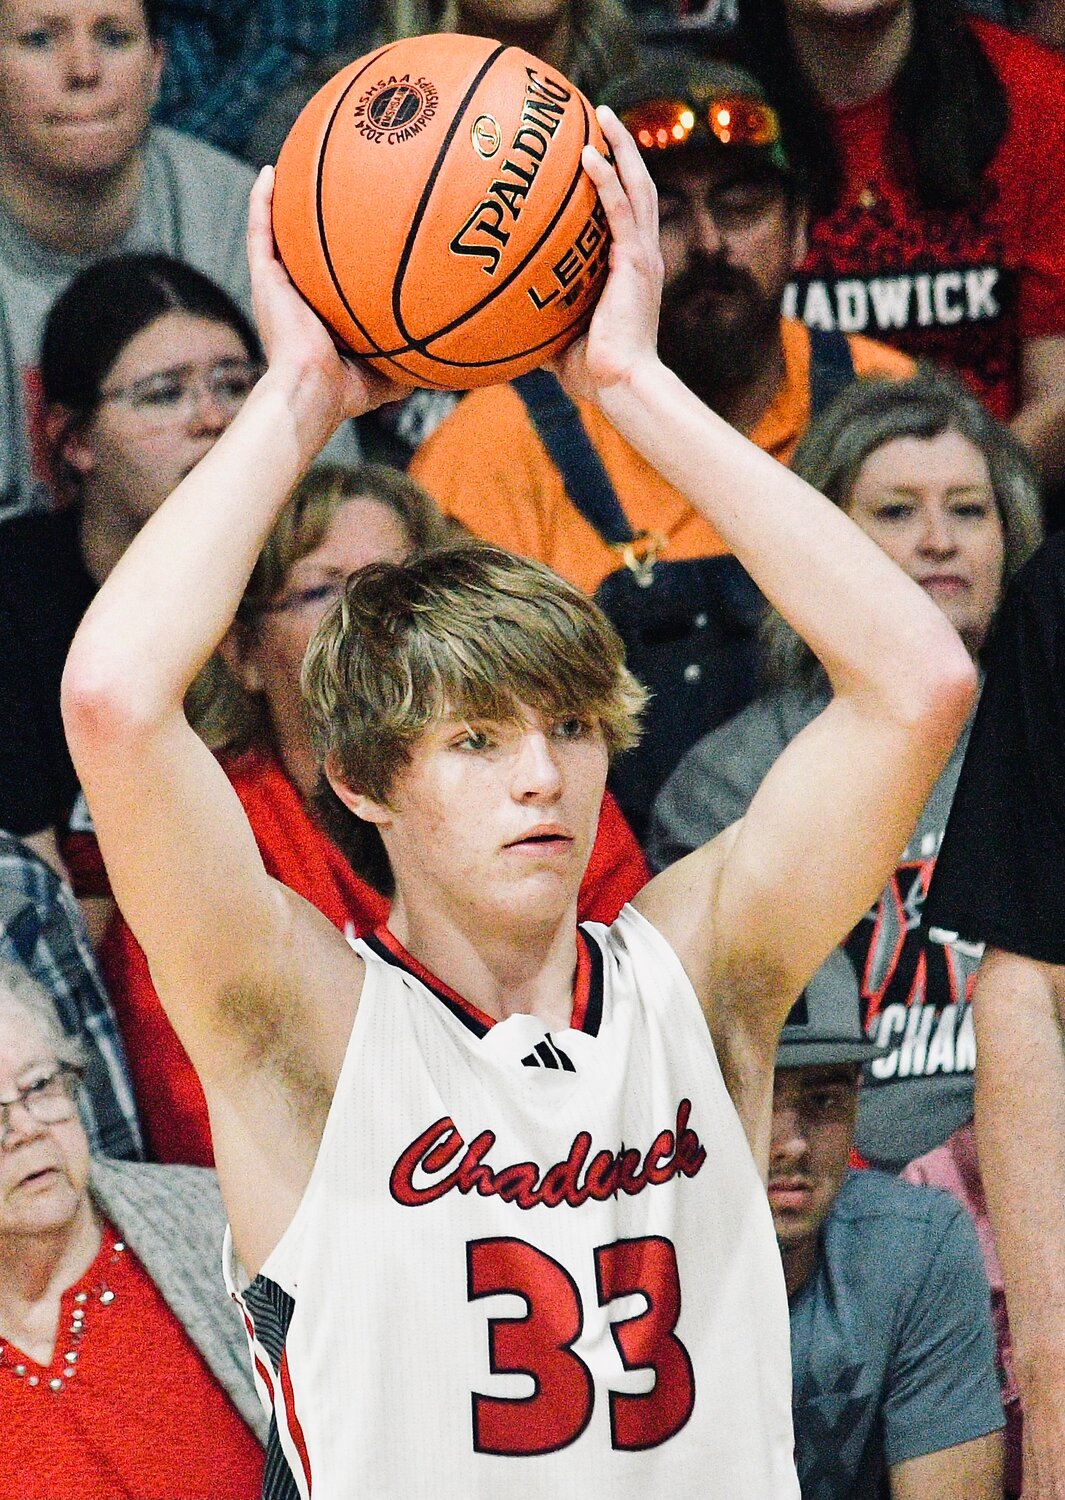 CHADWICK'S CLAYTON GARRISON looks to make an in-bounds pass.